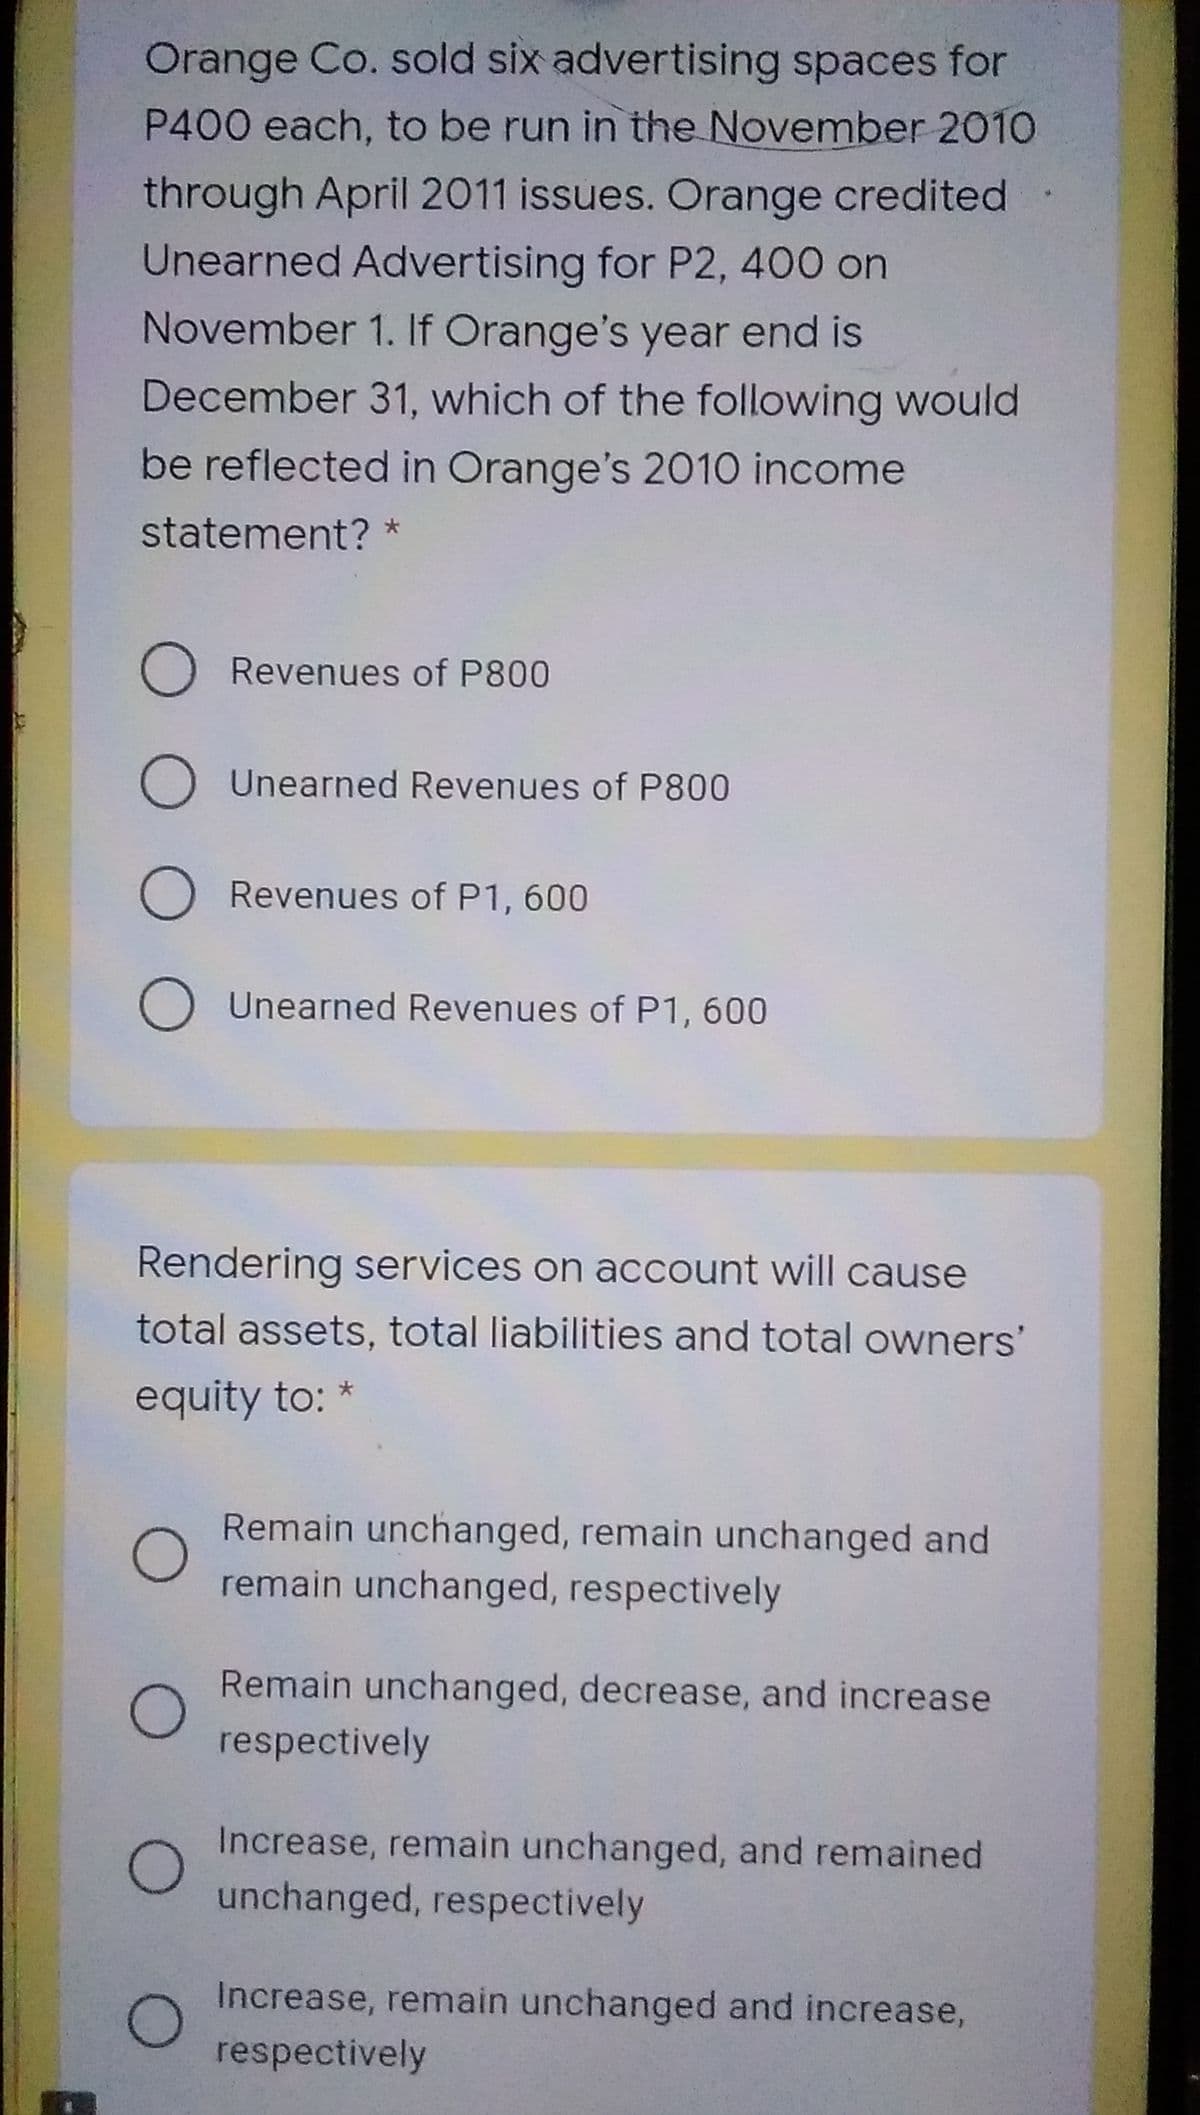 Orange Co. sold six advertising spaces for
P400 each, to be run in the November 2010
through April 2011 issues. Orange credited
Unearned Advertising for P2, 400 on
November 1. If Orange's year end is
December 31, which of the following would
be reflected in Orange's 2010 income
statement? *
O Revenues of P800
O Unearned Revenues of P800
O Revenues of P1, 600
O Unearned Revenues of P1, 600
Rendering services on account will cause
total assets, total liabilities and total owners'
equity to: *
Remain unchanged, remain unchanged and
remain unchanged, respectively
Remain unchanged, decrease, and increase
respectively
Increase, remain unchanged, and remained
unchanged, respectively
Increase, remain unchanged and increase,
respectively
